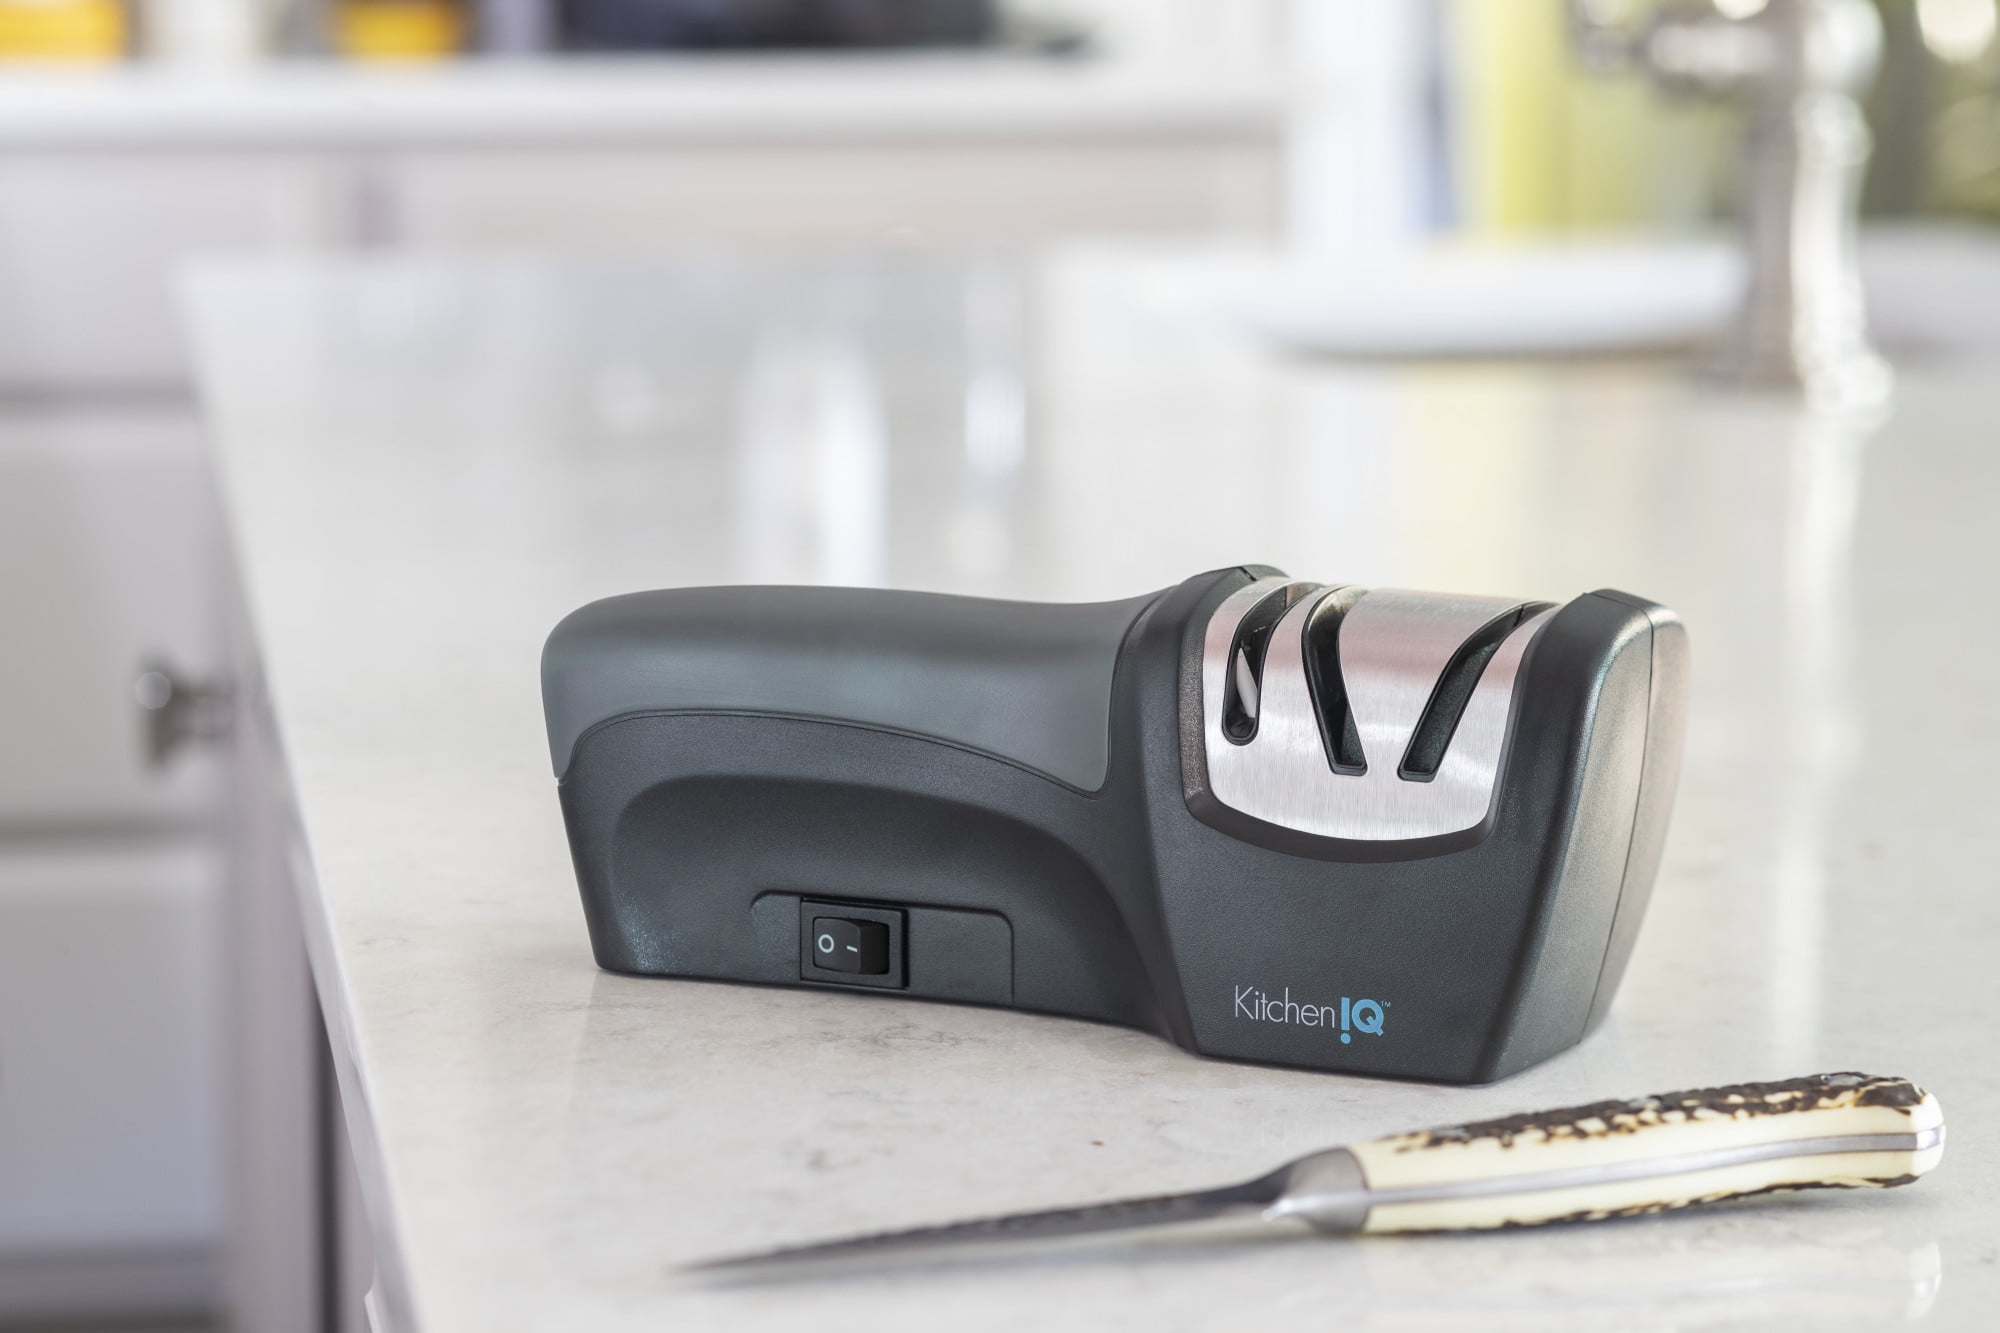 Smith's Compact Electric Knife Sharpener